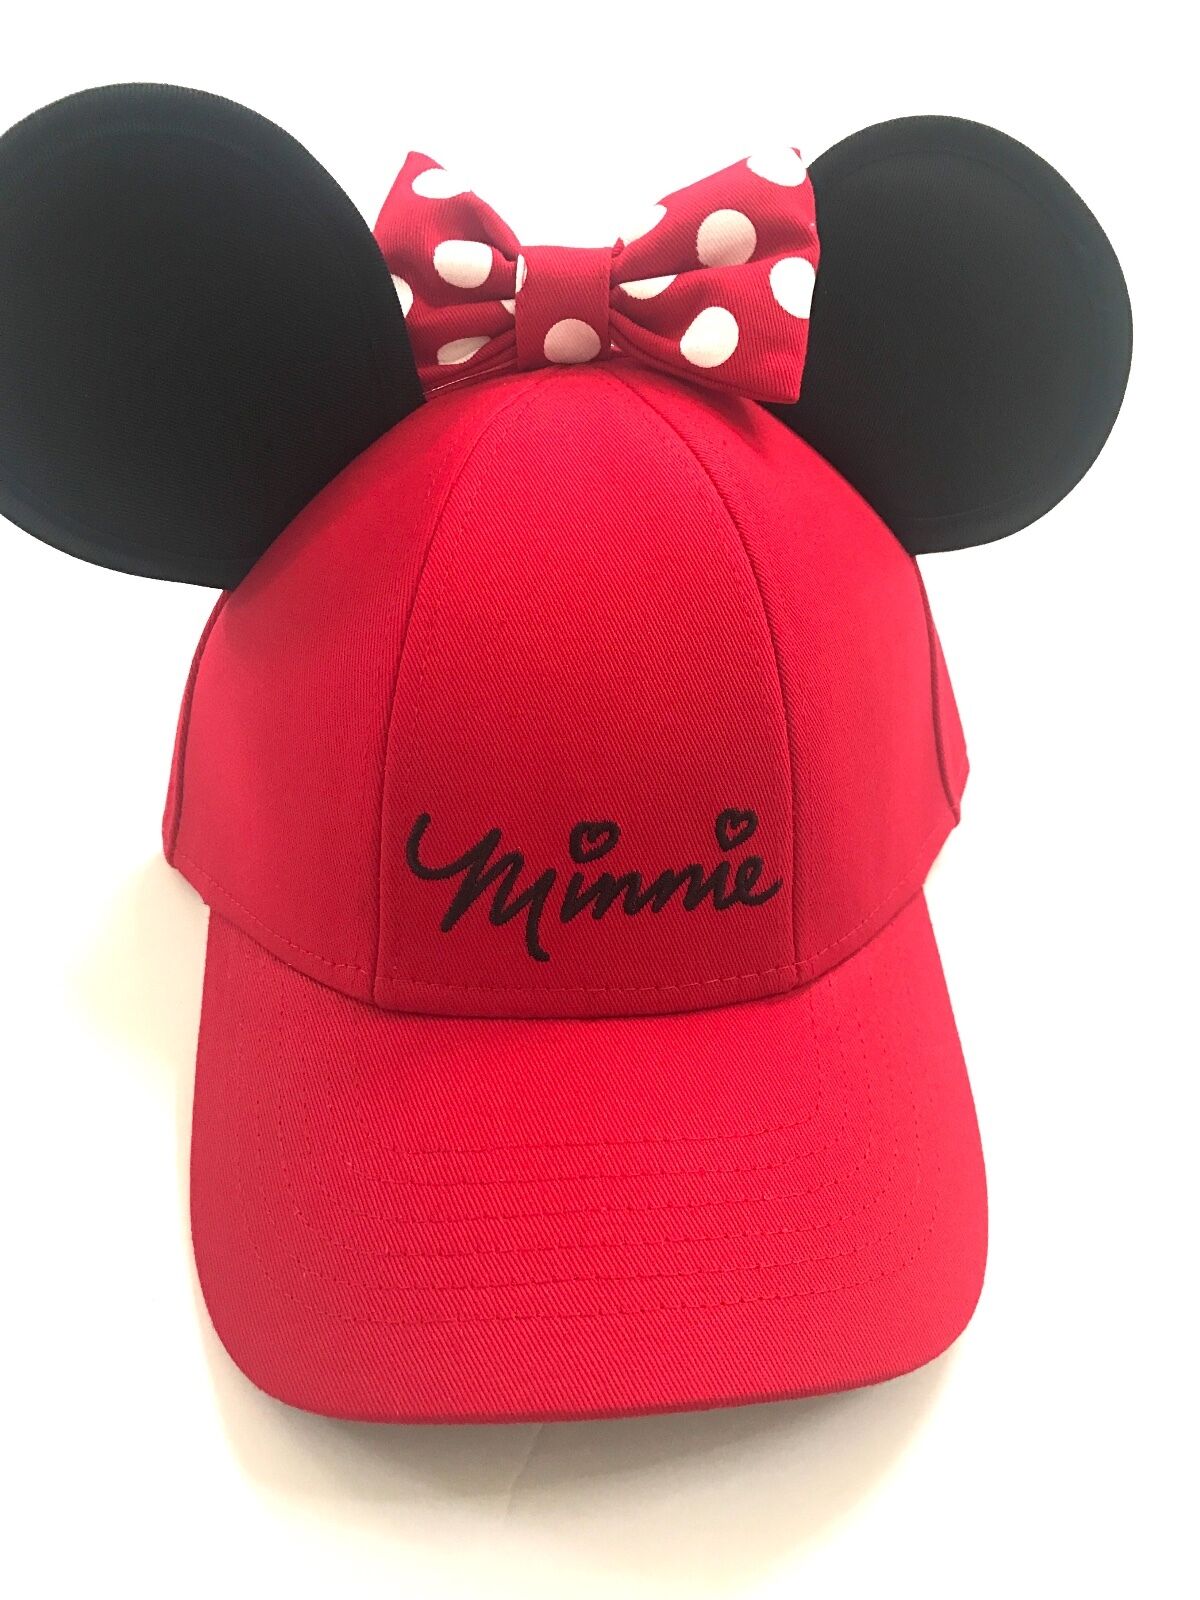 Disney Minnie Mouse Polka Dot Baseball with Ears, Red Womens Hat Cap New Bright